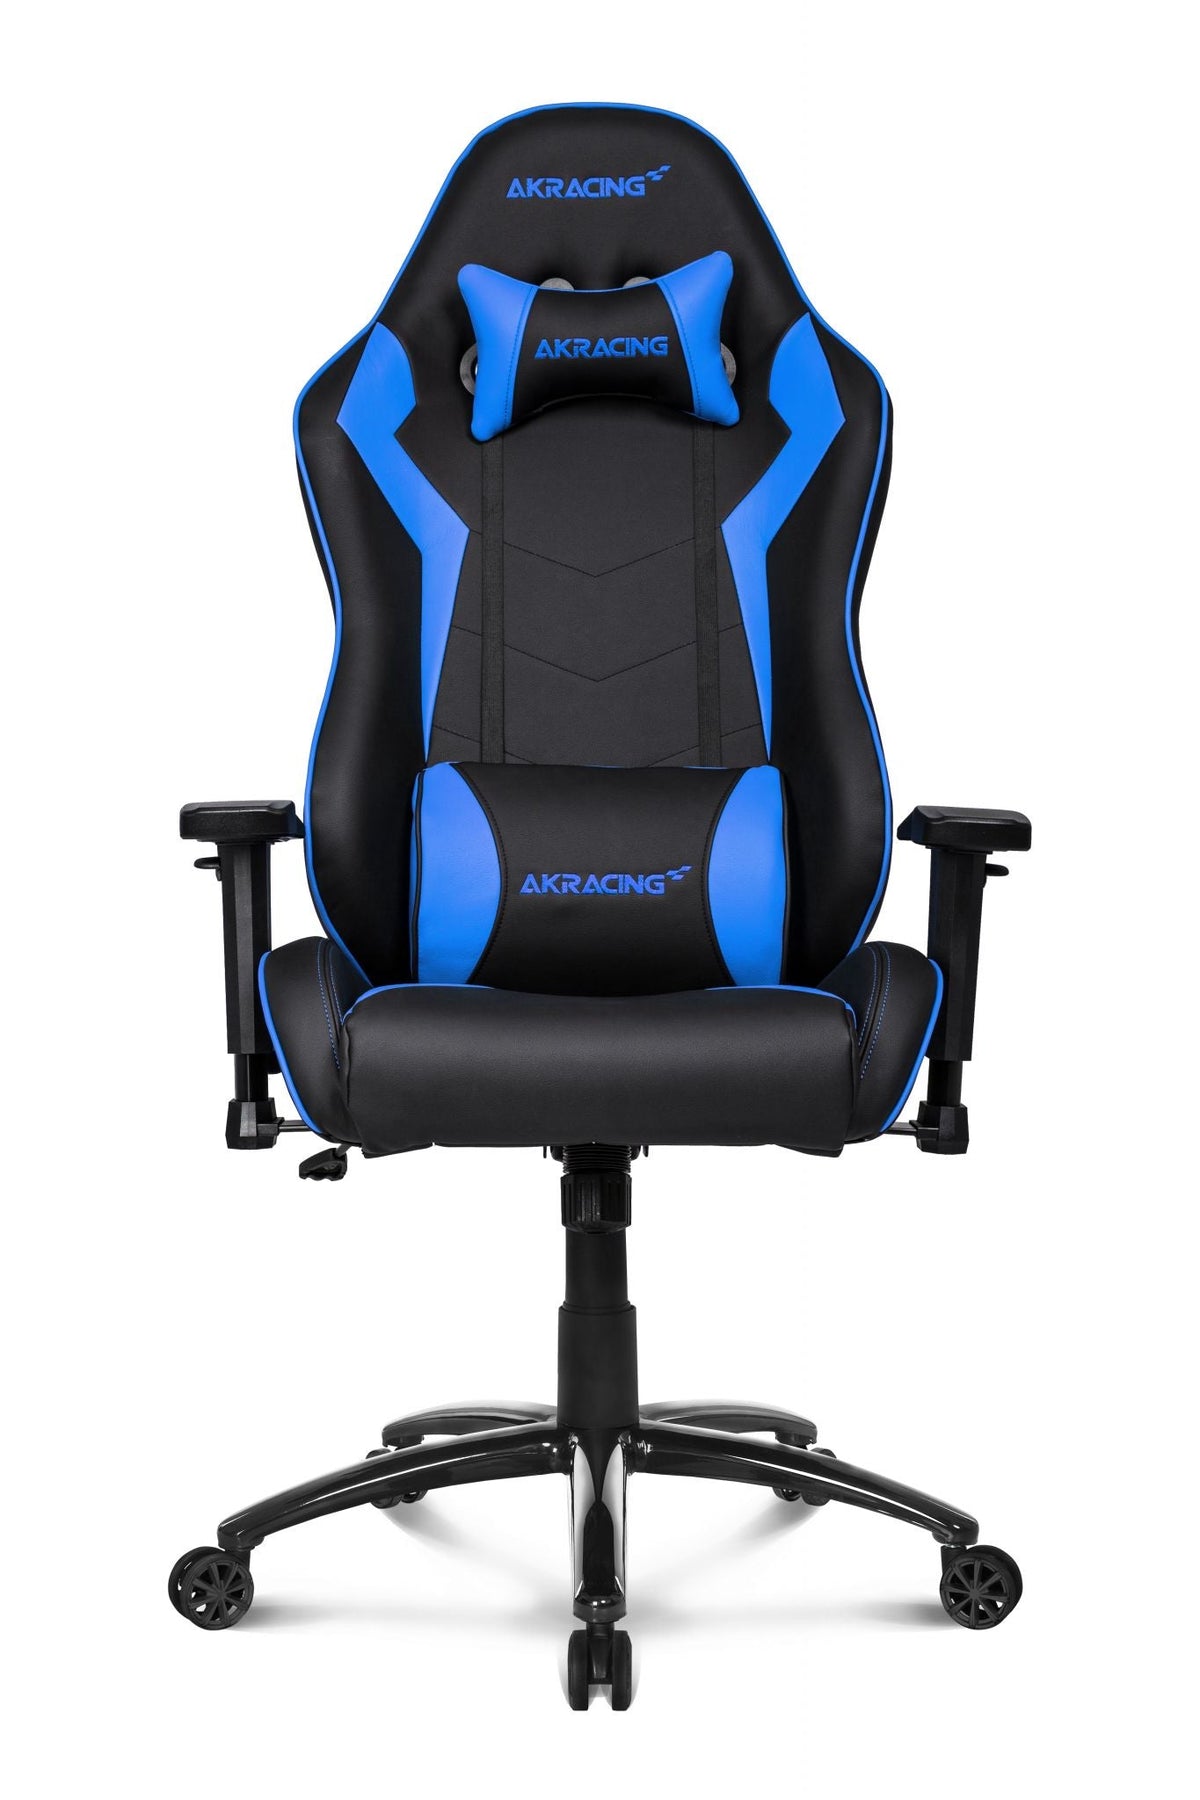 AKRacing SX PC gaming chair Upholstered seat Black, Blue